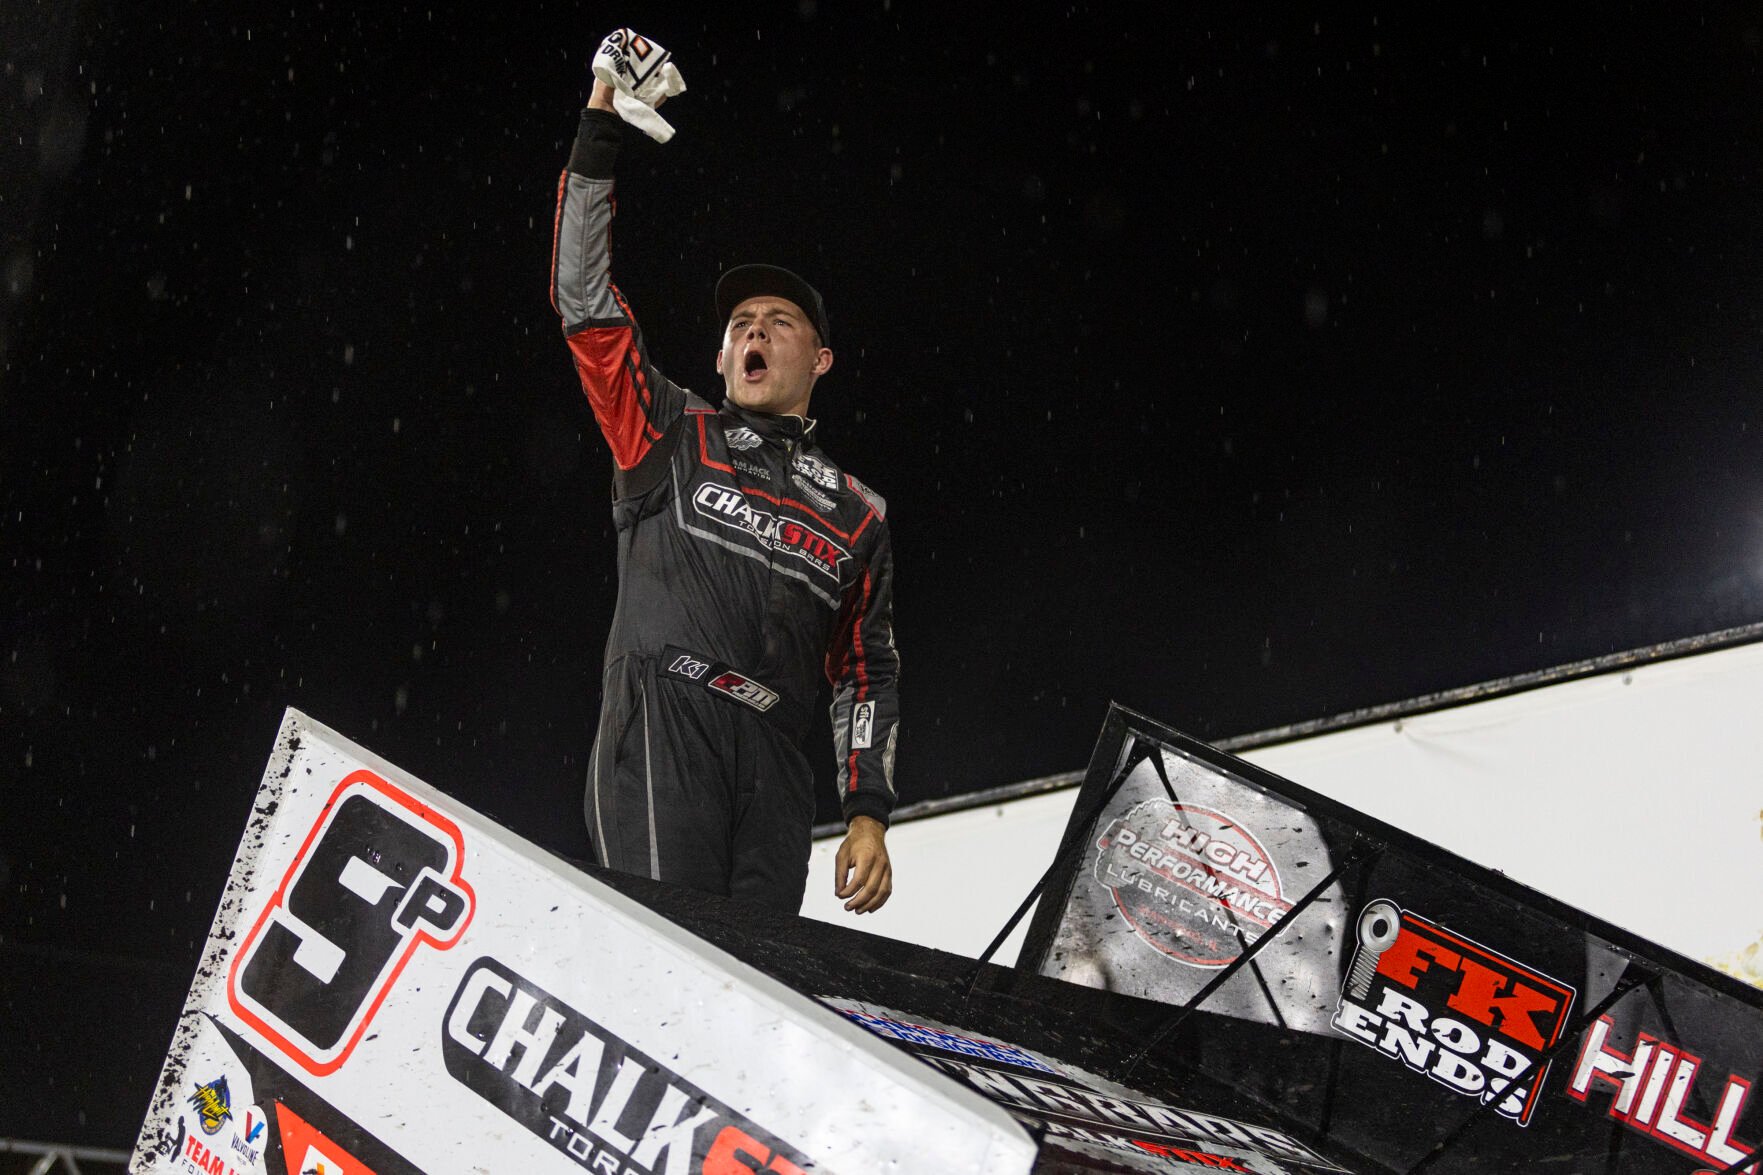 Price-Miller holds off Brown to win second night of 360 Nationals